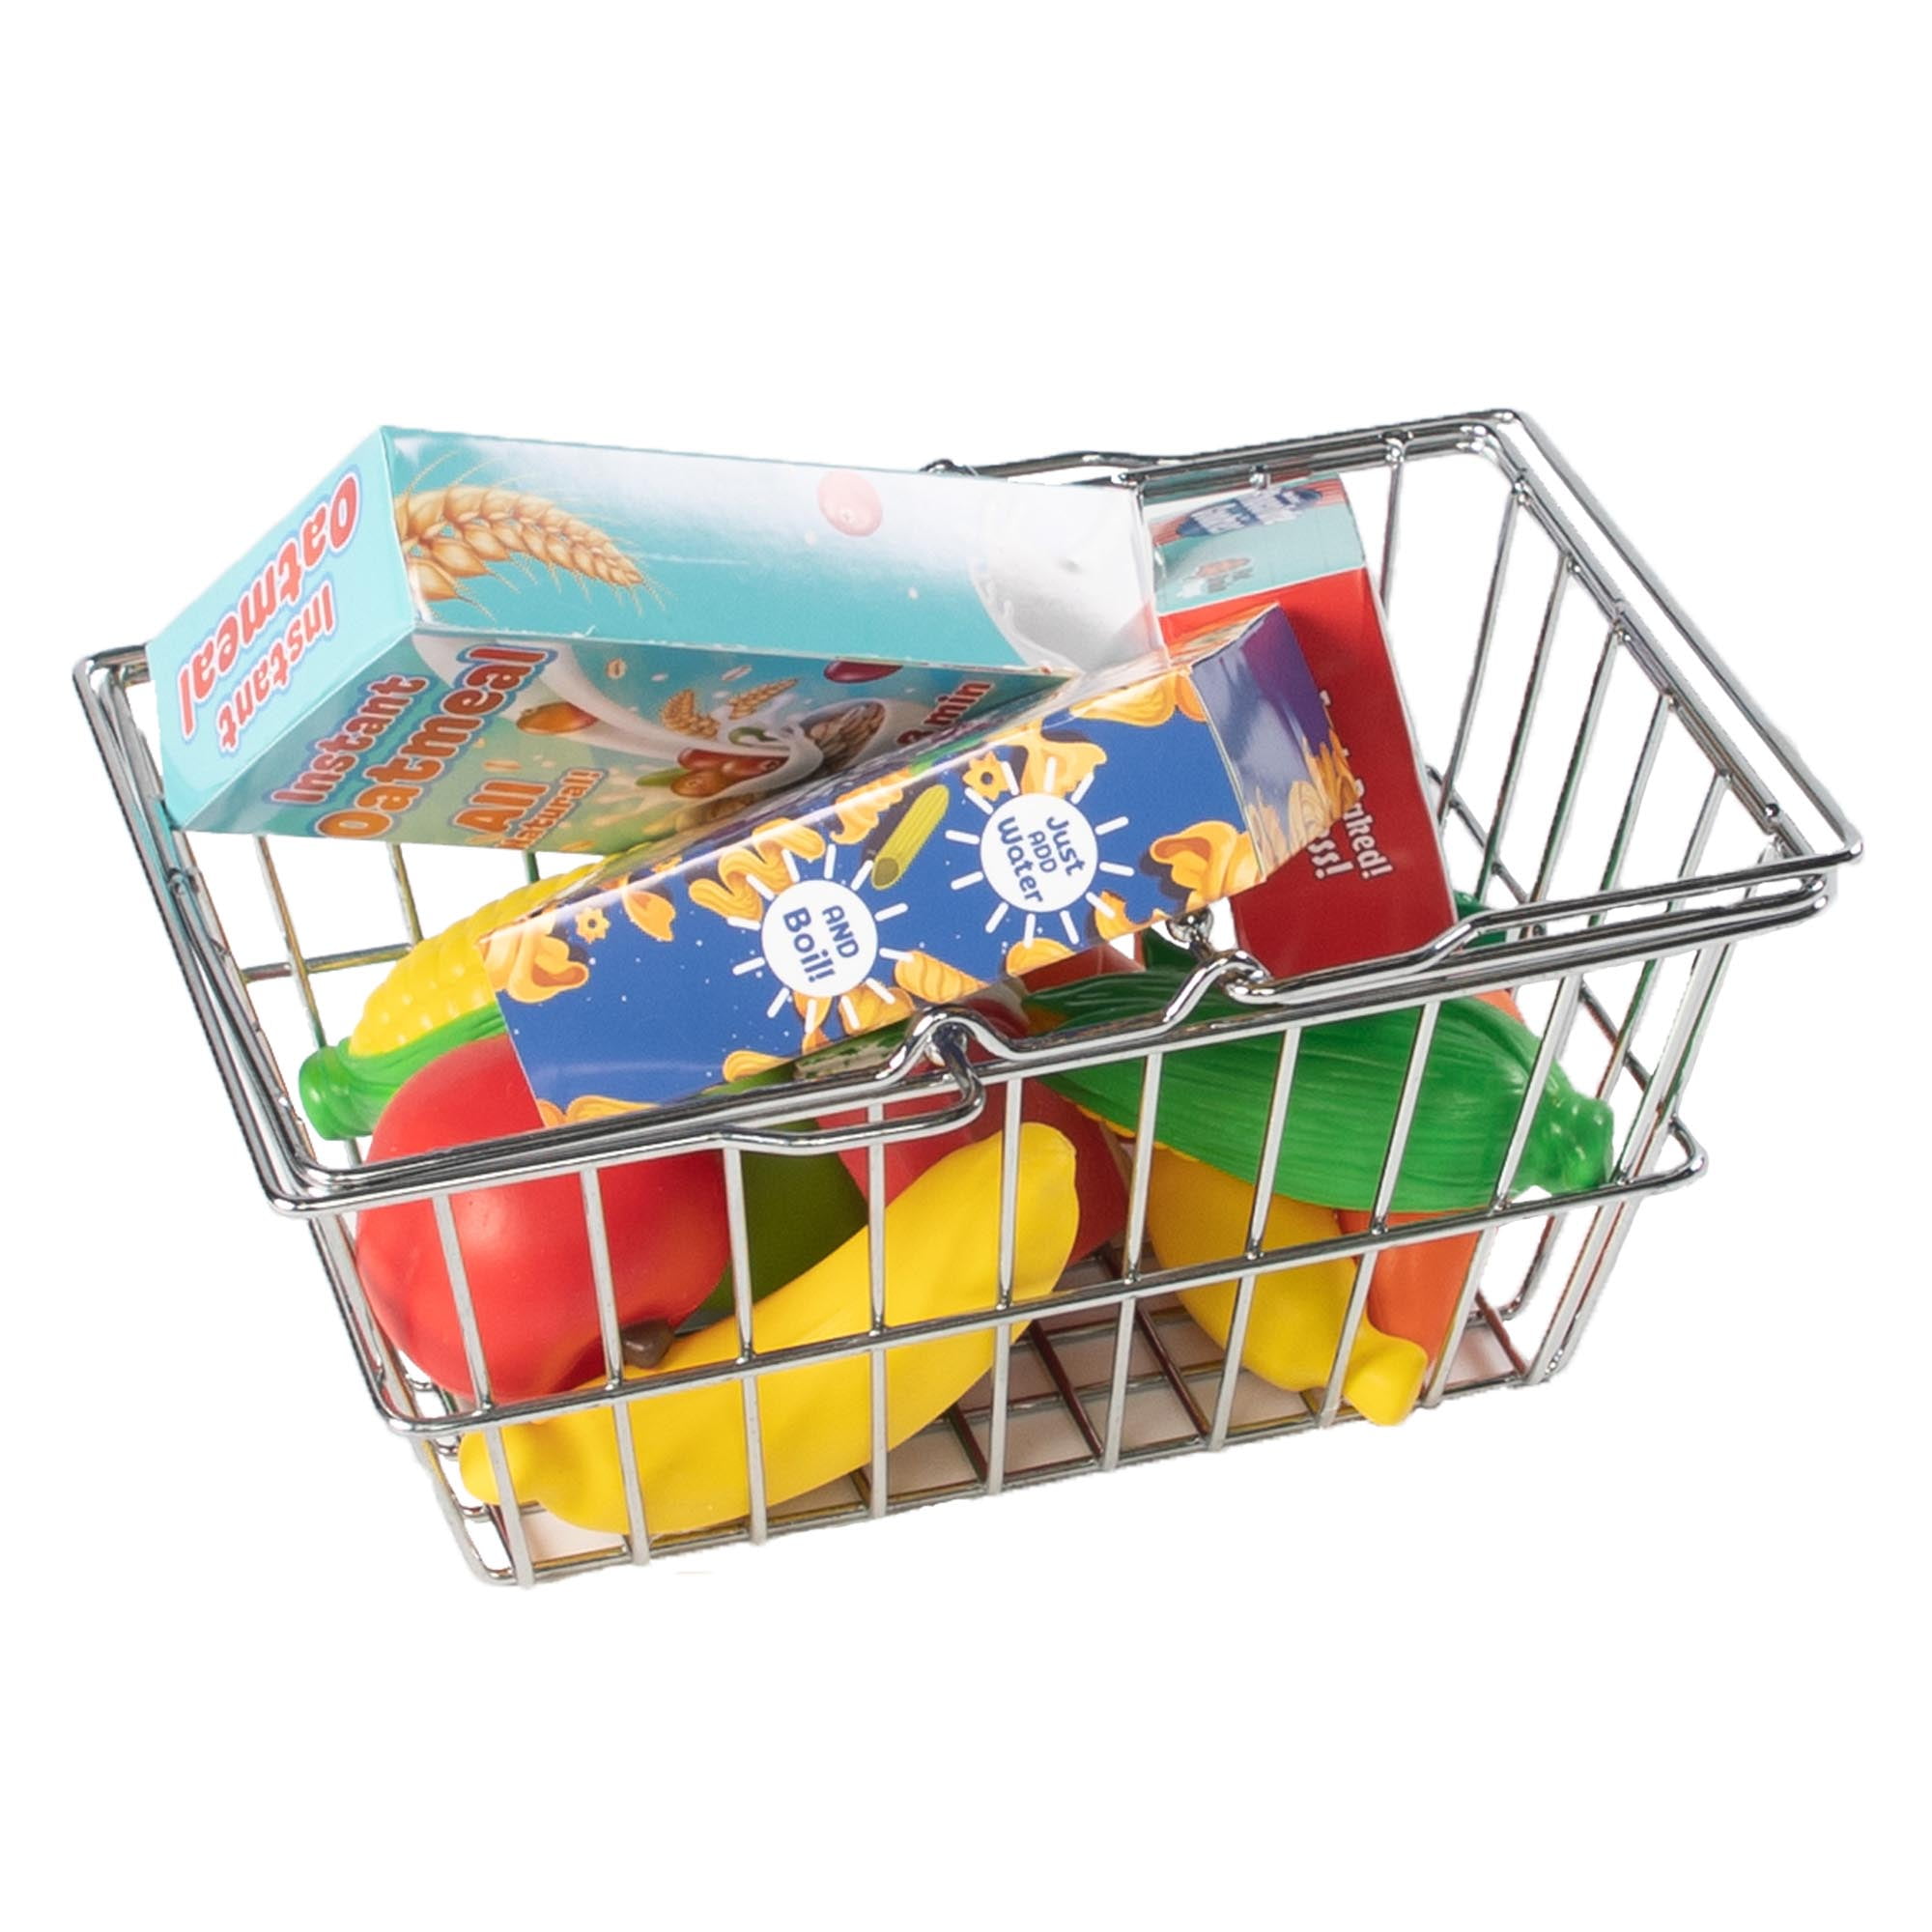 Details about   New MELISSA & DOUG Fill & Roll GROCERY BASKET Play Set w Pretend Grocerys Food 